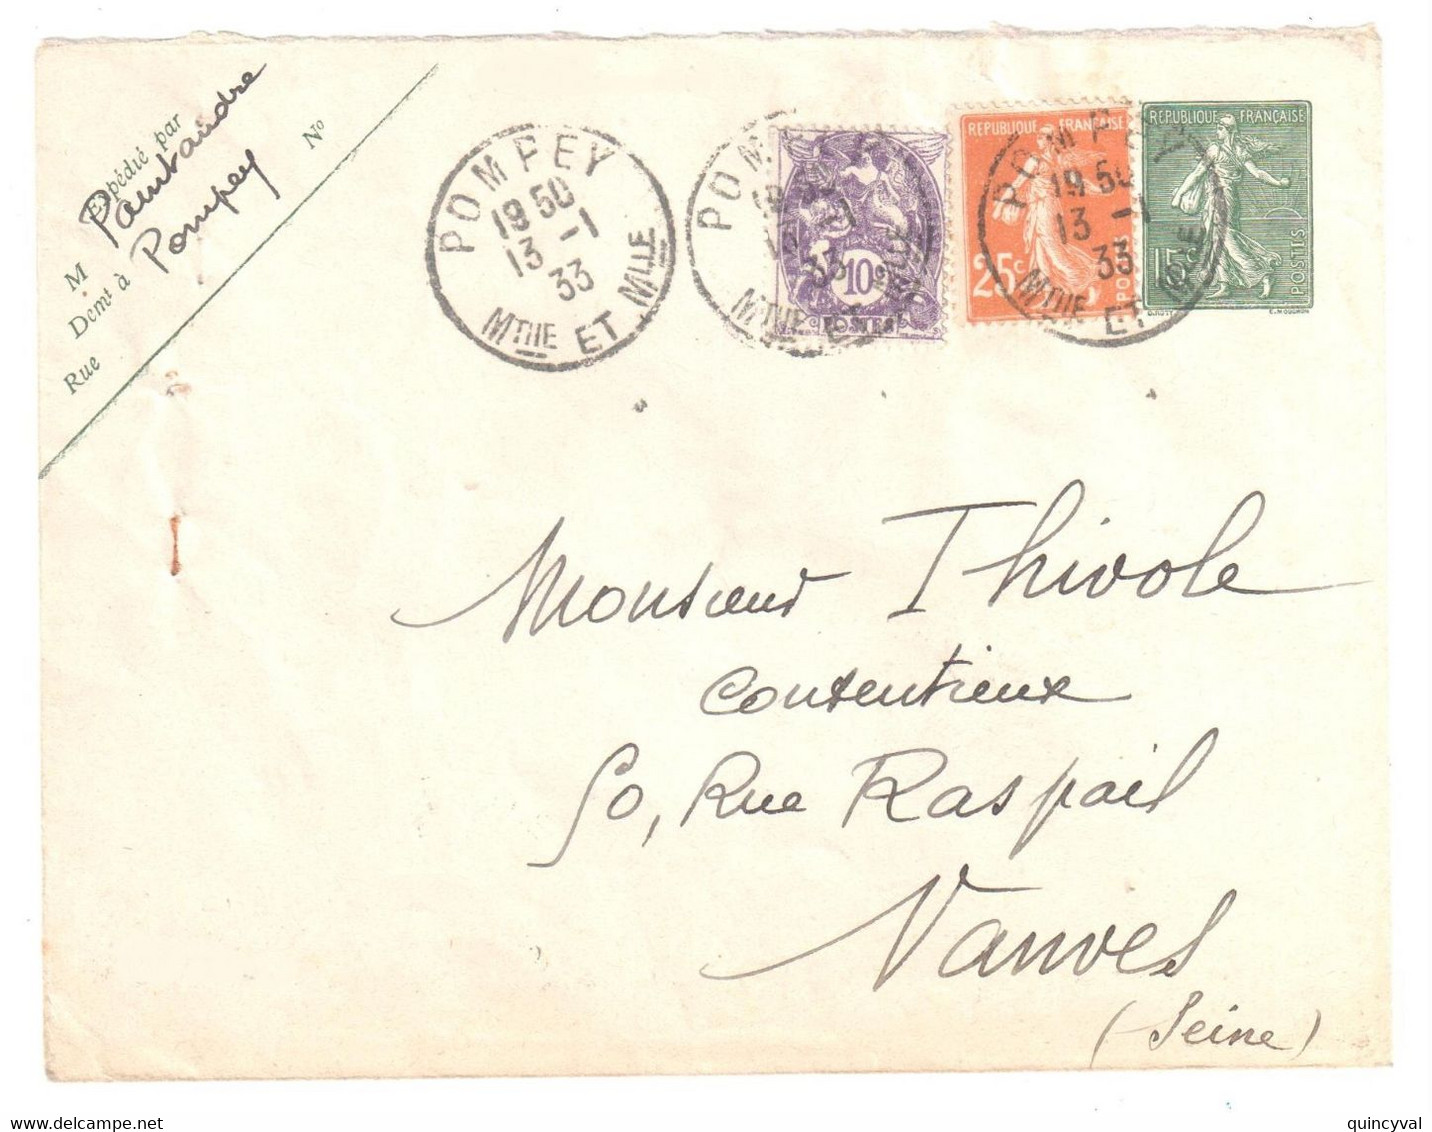 POMPEY M Et Moselle Enveoppe Entier Postale 15c Semeuse Lignée Mill 940 Compl 10C Blanc 25c Semeuse Yv 130-E9 233 235 - Standard Covers & Stamped On Demand (before 1995)